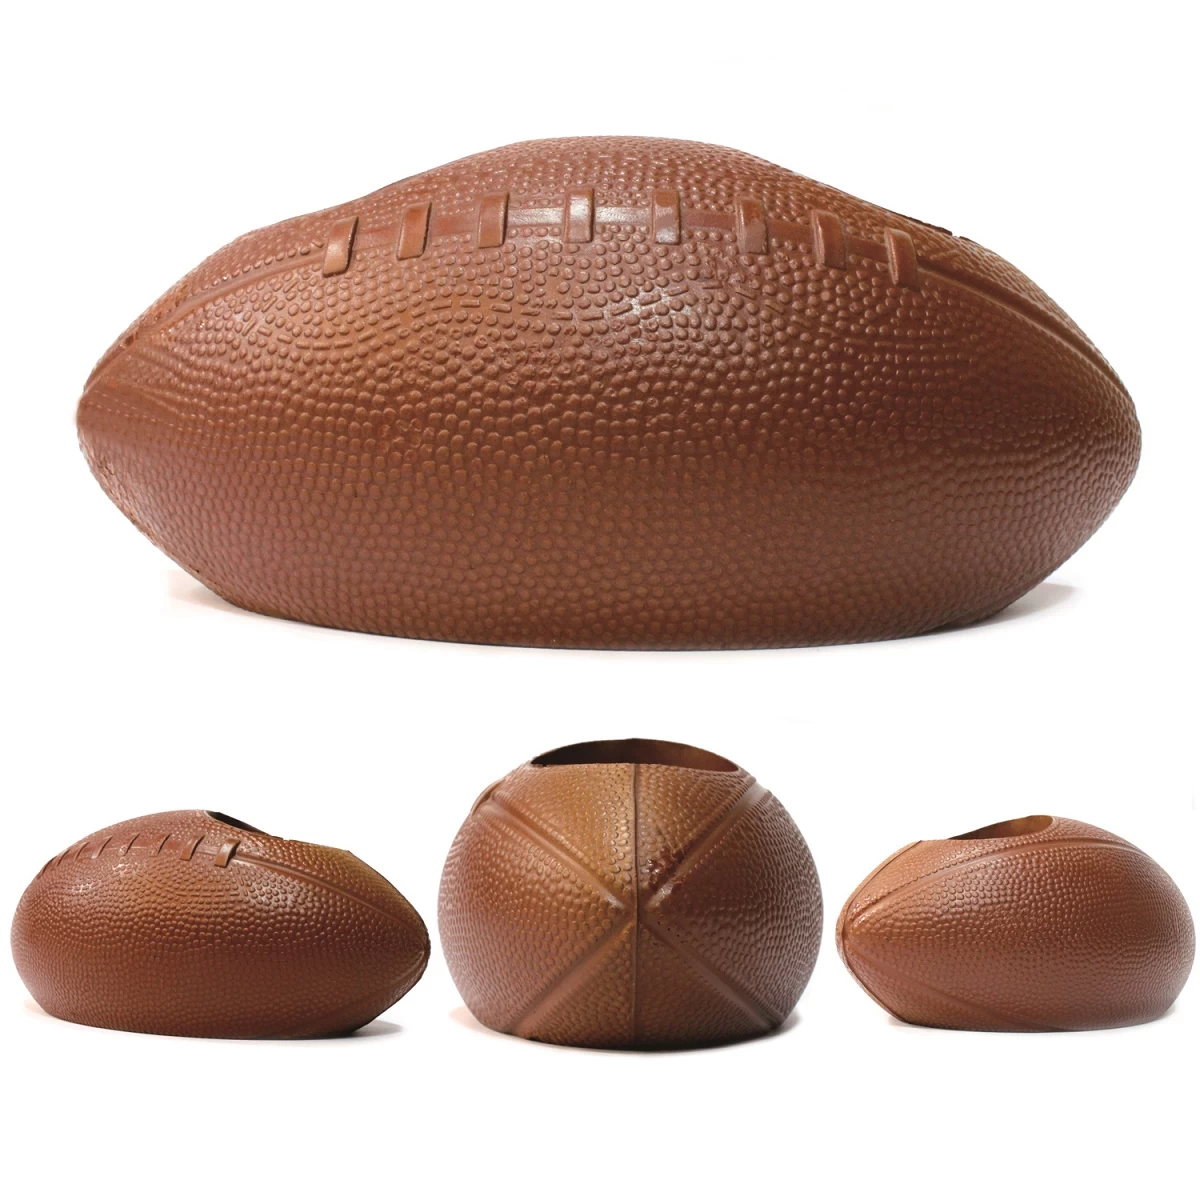 China whole sale foam rugby ball,customizable children adult play toys,PU Football article,Rugby Football Hersteller